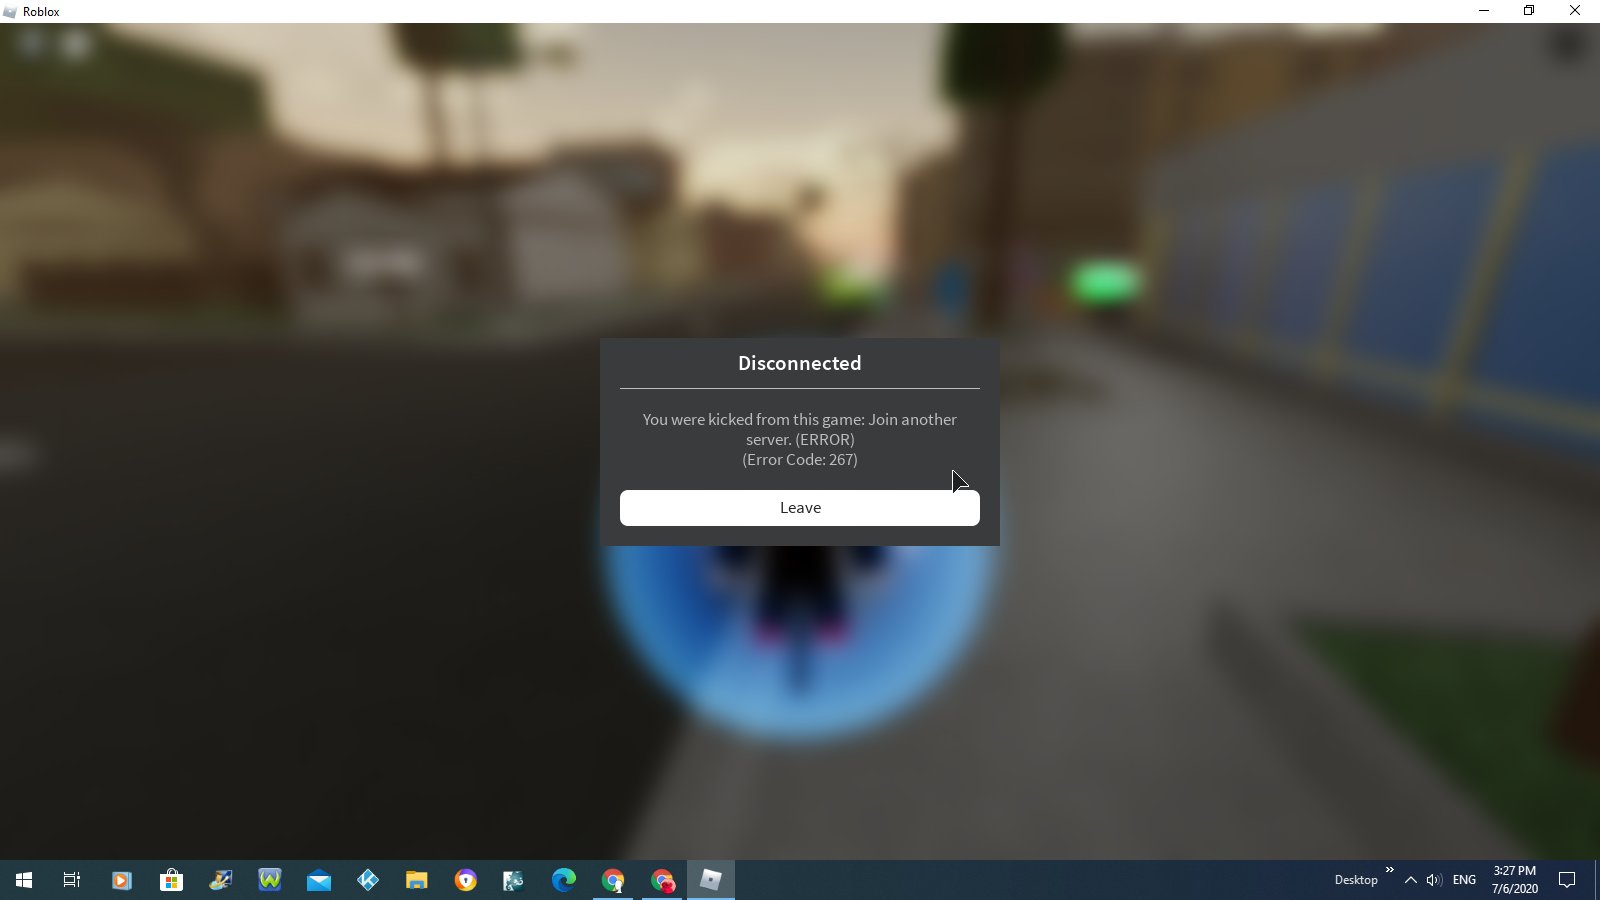 How To Fix Roblox Error 267 - You Were Kicked From This Game 